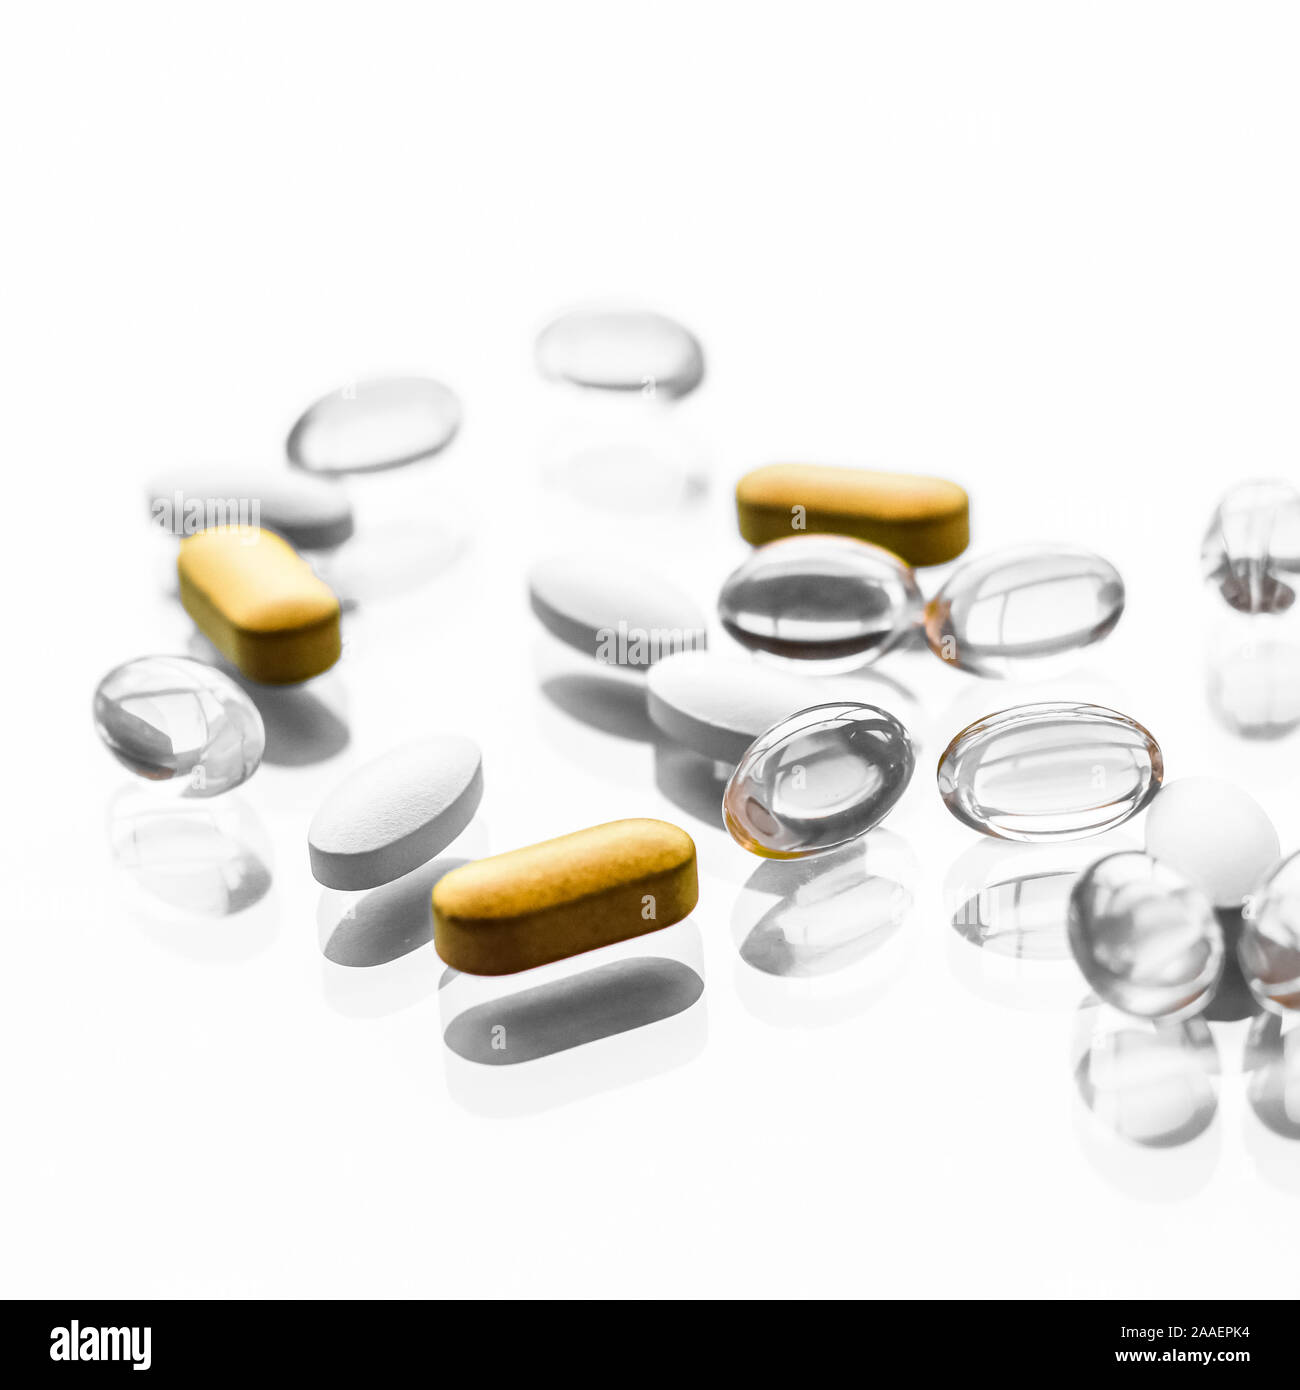 Pharma, branding and lab concept - Pills and capsules for diet nutrition, anti-aging beauty supplements, probiotic drugs, pill vitamins as medicine an Stock Photo